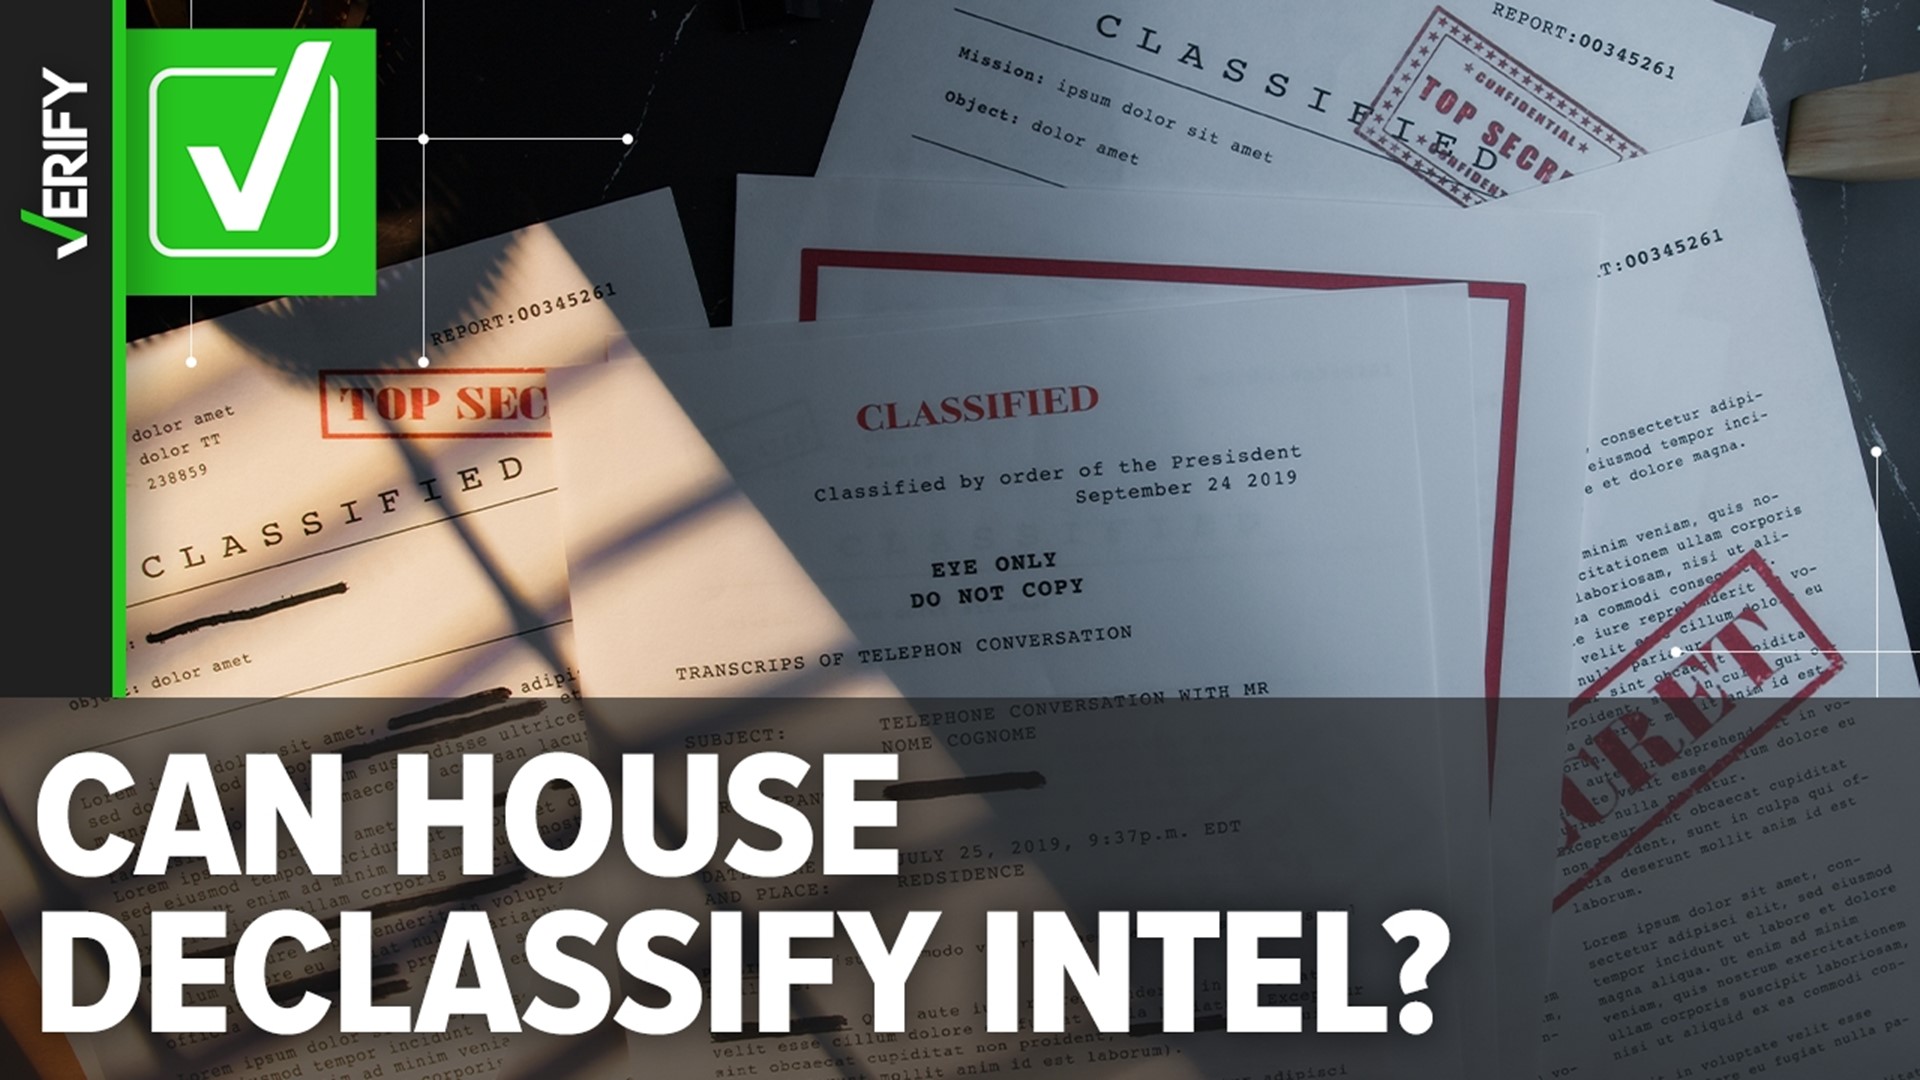 Info about a national security threat obtained by the intelligence committee, reportedly about Russian space nukes, could be declassified. We VERIFY how.